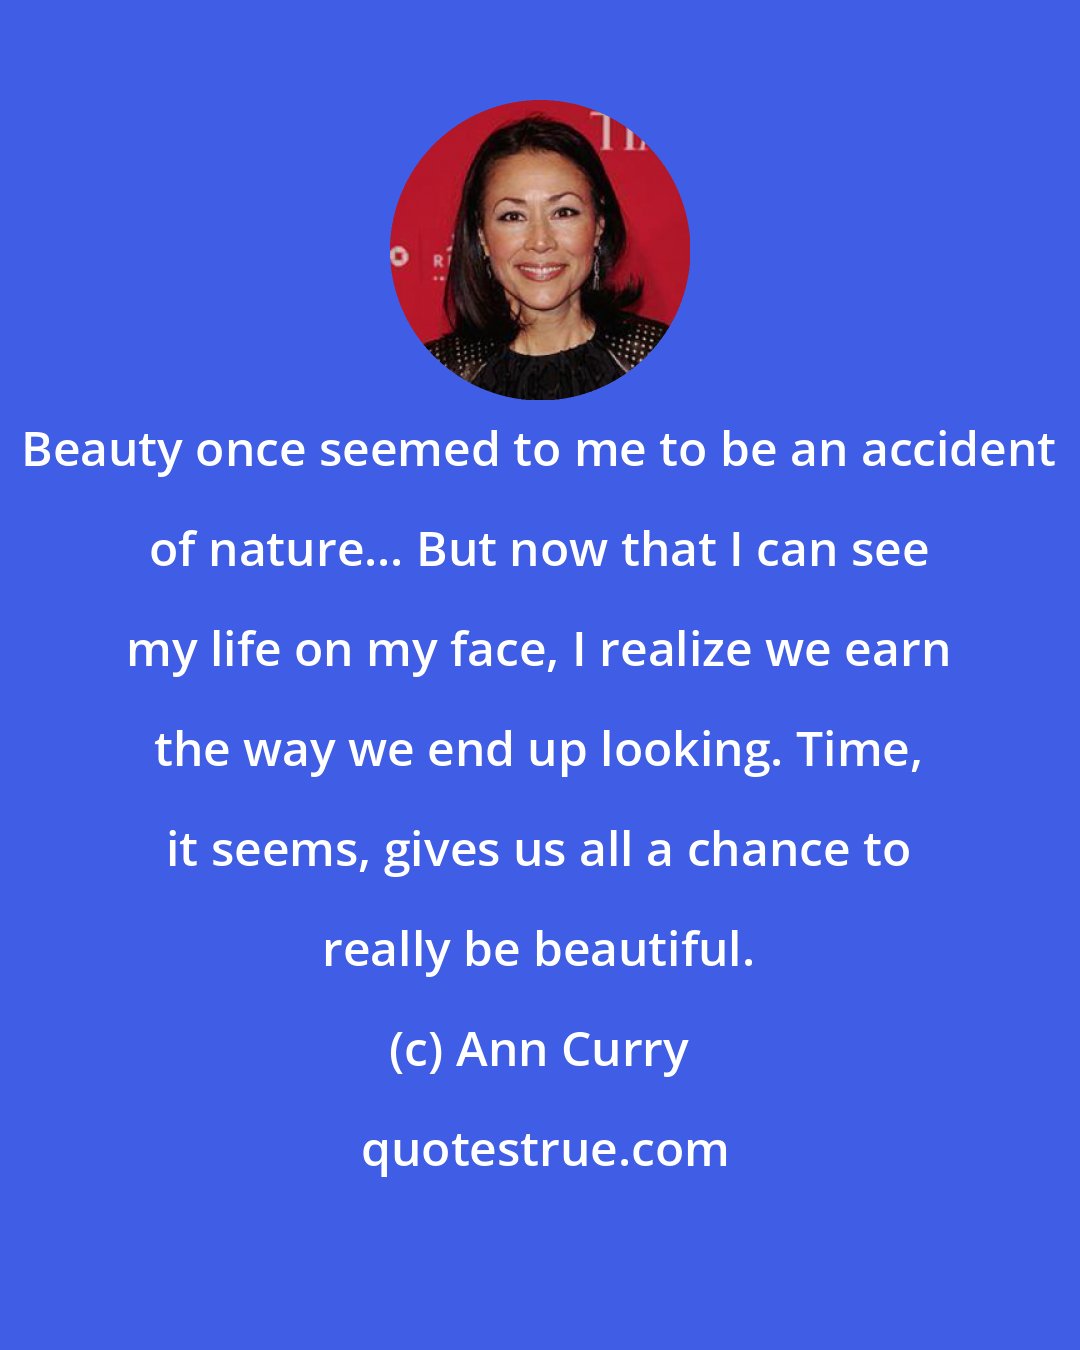 Ann Curry: Beauty once seemed to me to be an accident of nature... But now that I can see my life on my face, I realize we earn the way we end up looking. Time, it seems, gives us all a chance to really be beautiful.